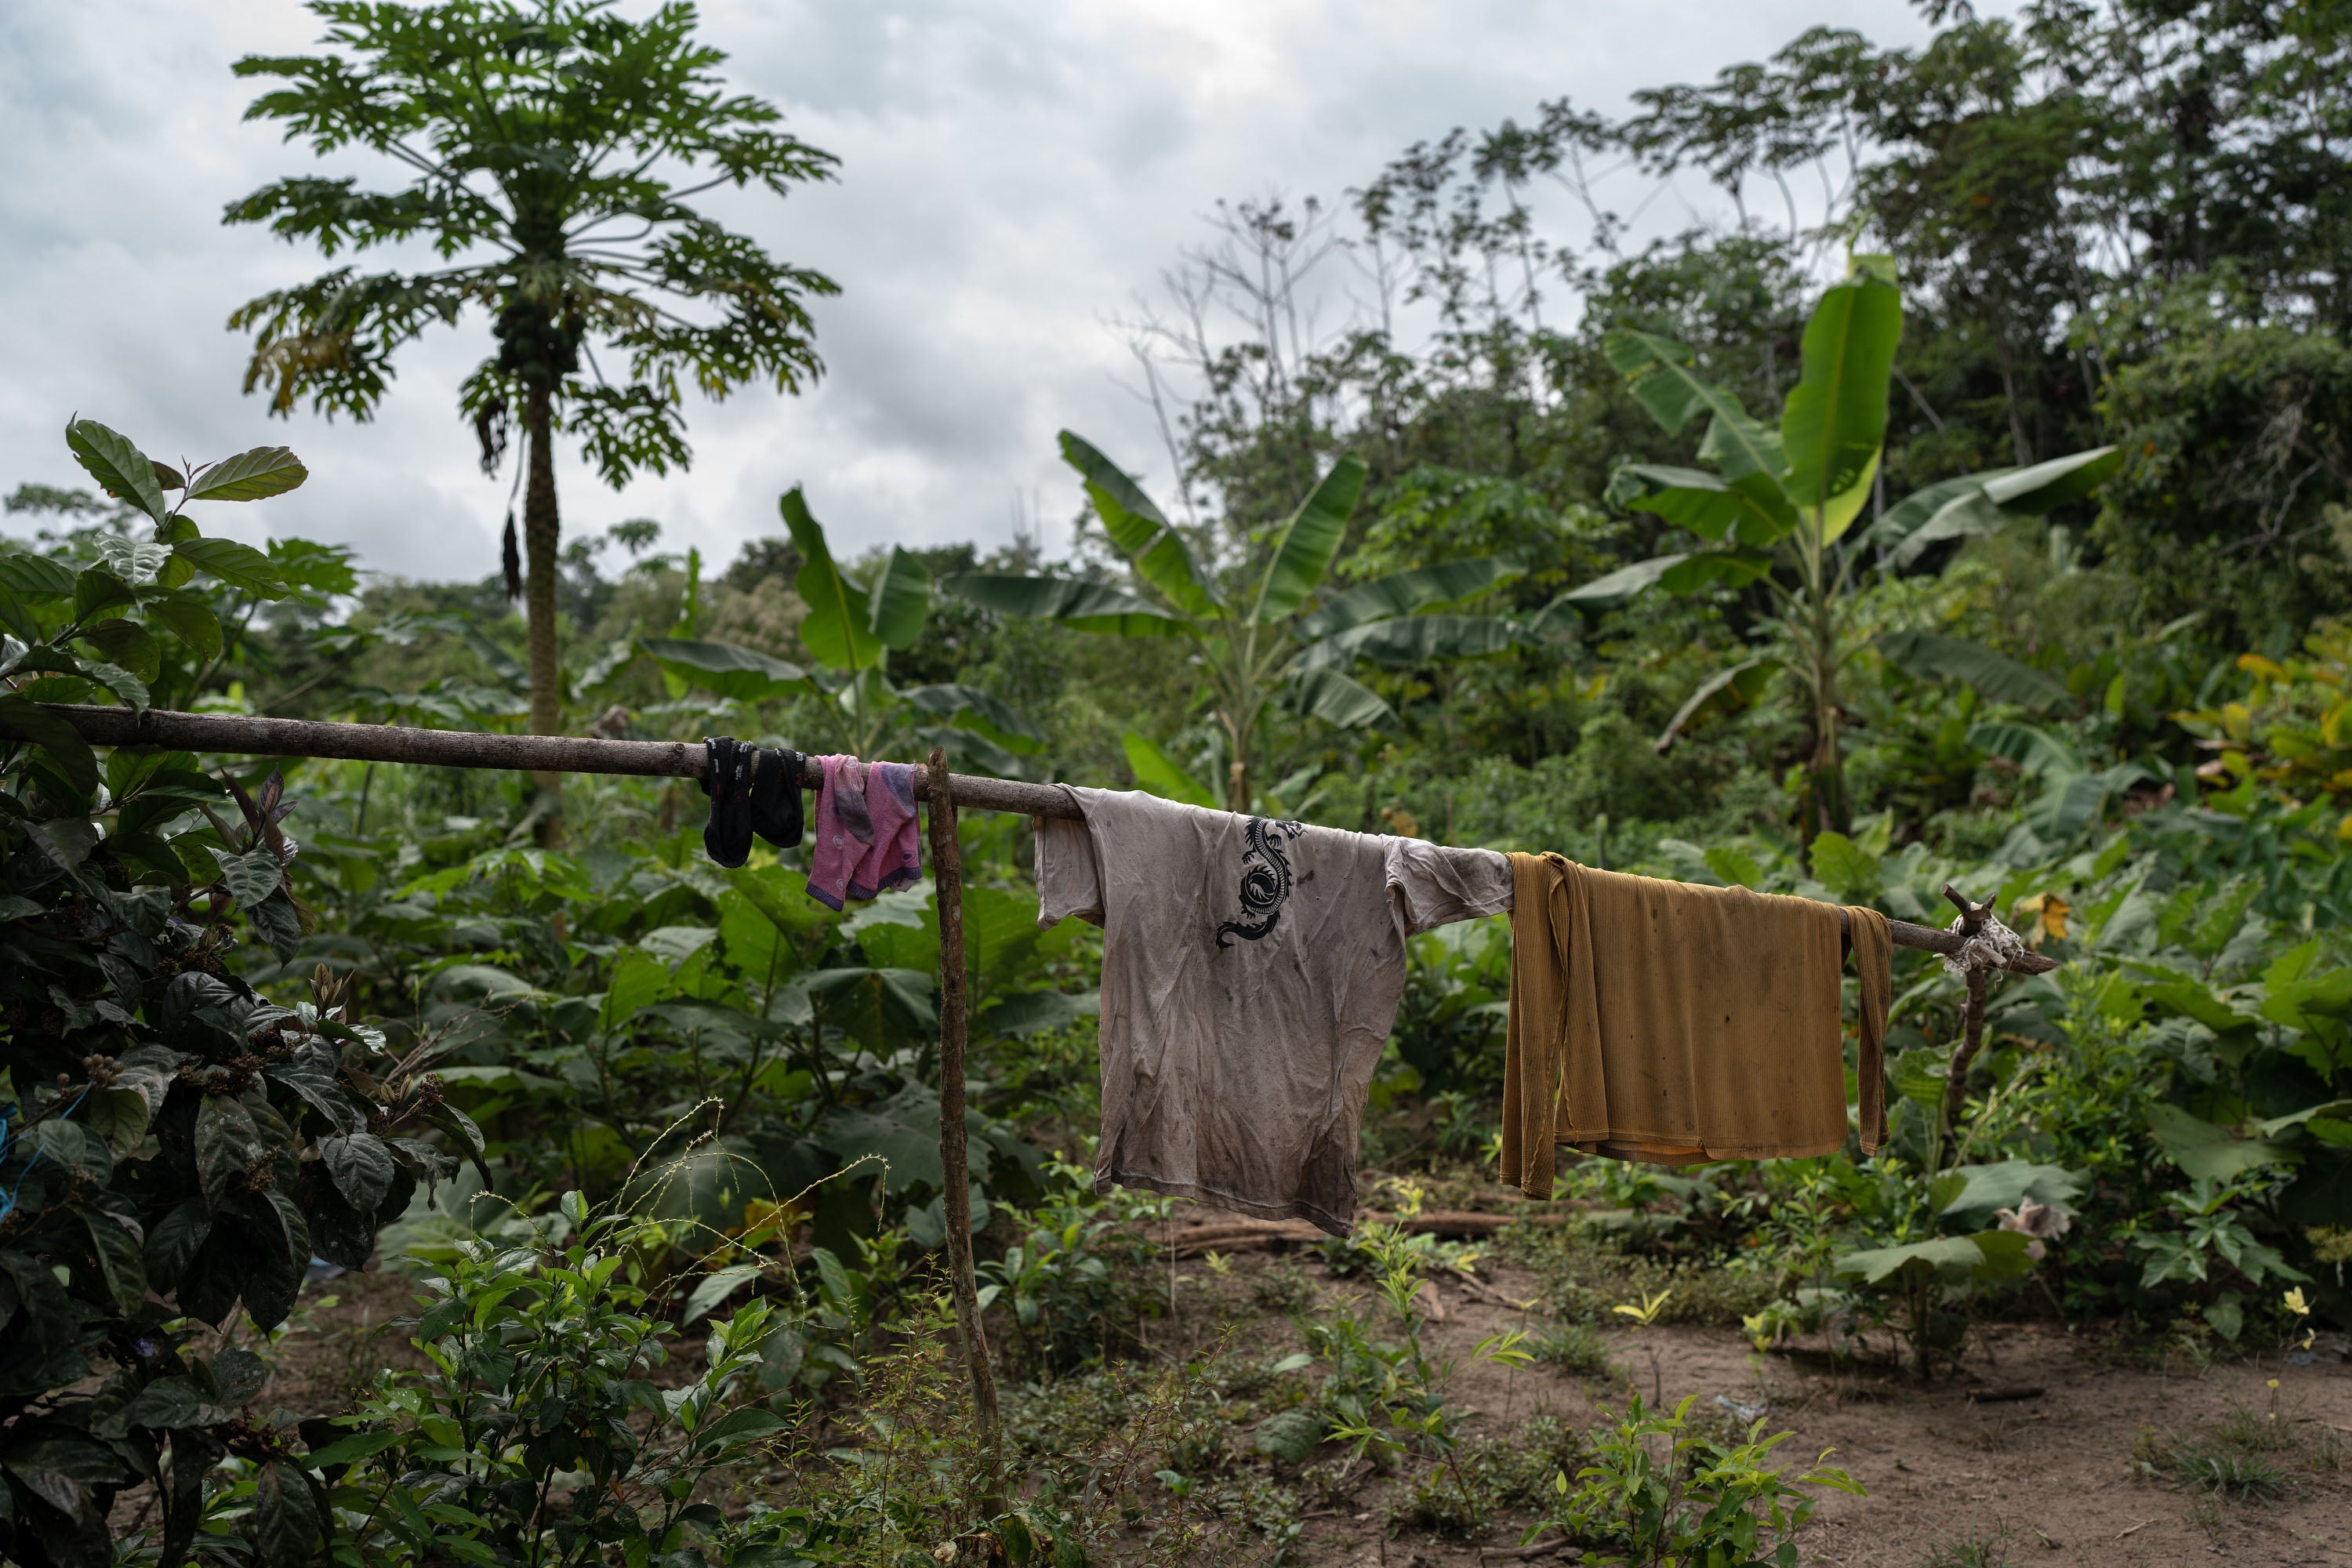 Clothes are left hanging amid illegal coca crops in Ucayali